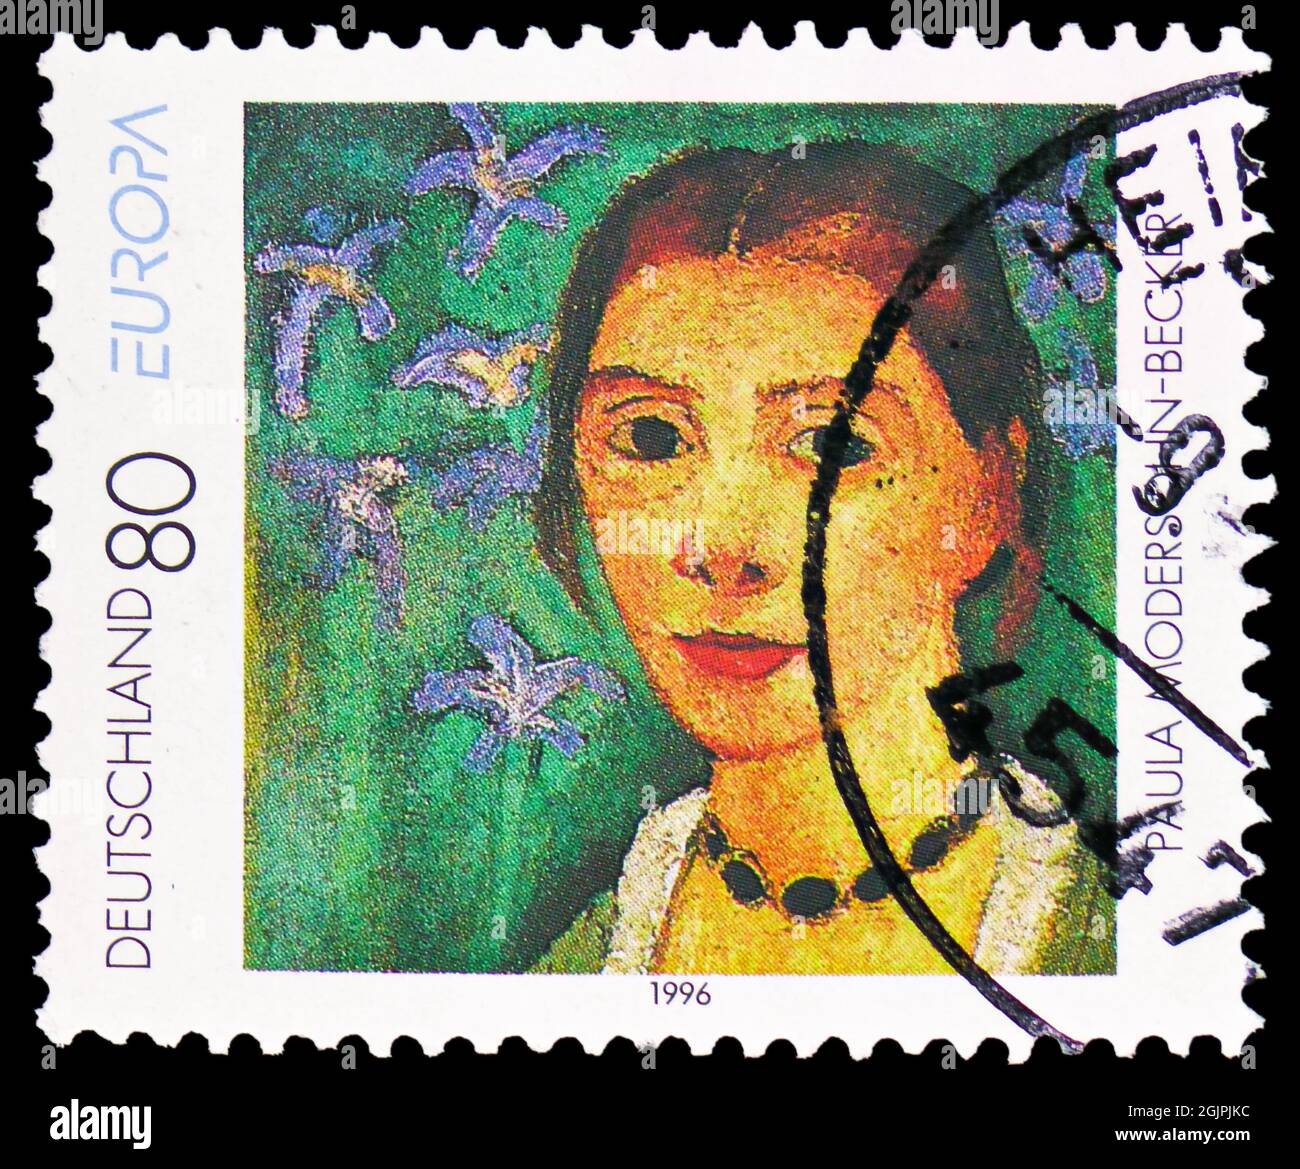 MOSCOW, RUSSIA - APRIL 17, 2021: Postage stamp printed in Germany shows Self-portrait, by Paula Modersohn-Becker (1876-1907), Europa (C.E.P.T.) 1996 - Stock Photo